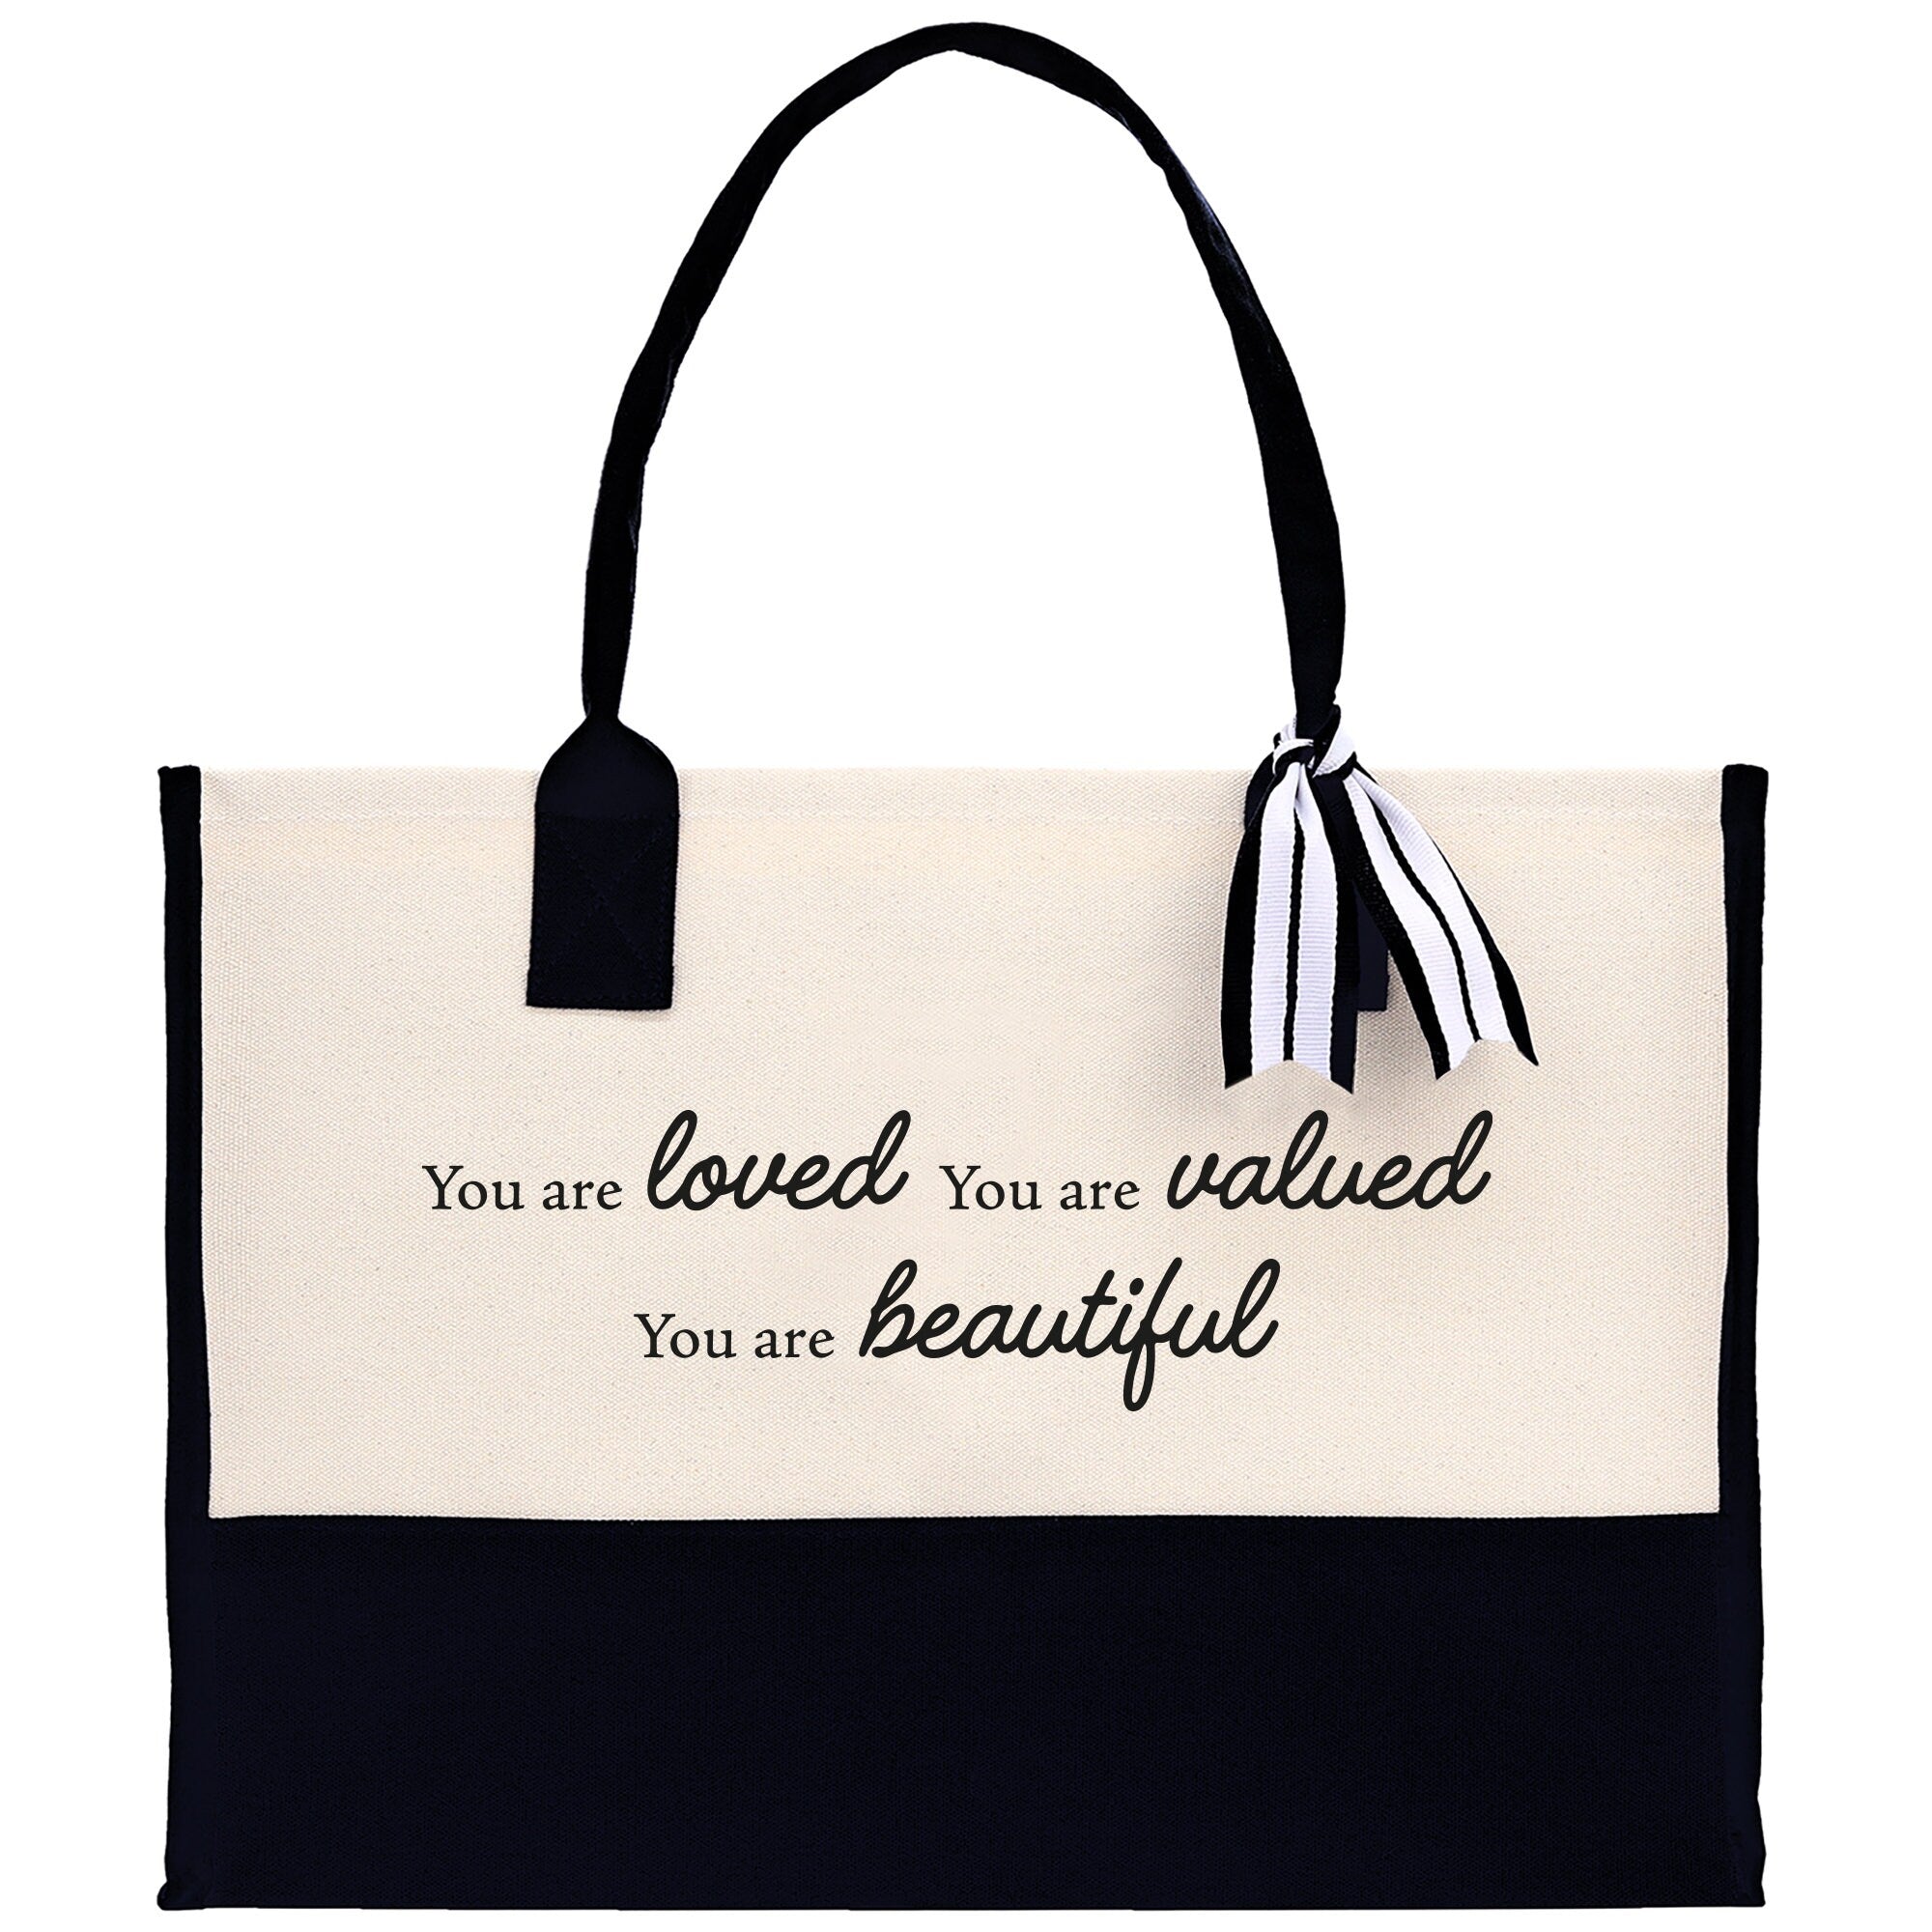 You Are Loved You Are Valued You Are Beautiful Canvas Tote Bag Birthday Gift for Her Weekender Tote Bag Beach Tote Bag Large Beach Tote Bag